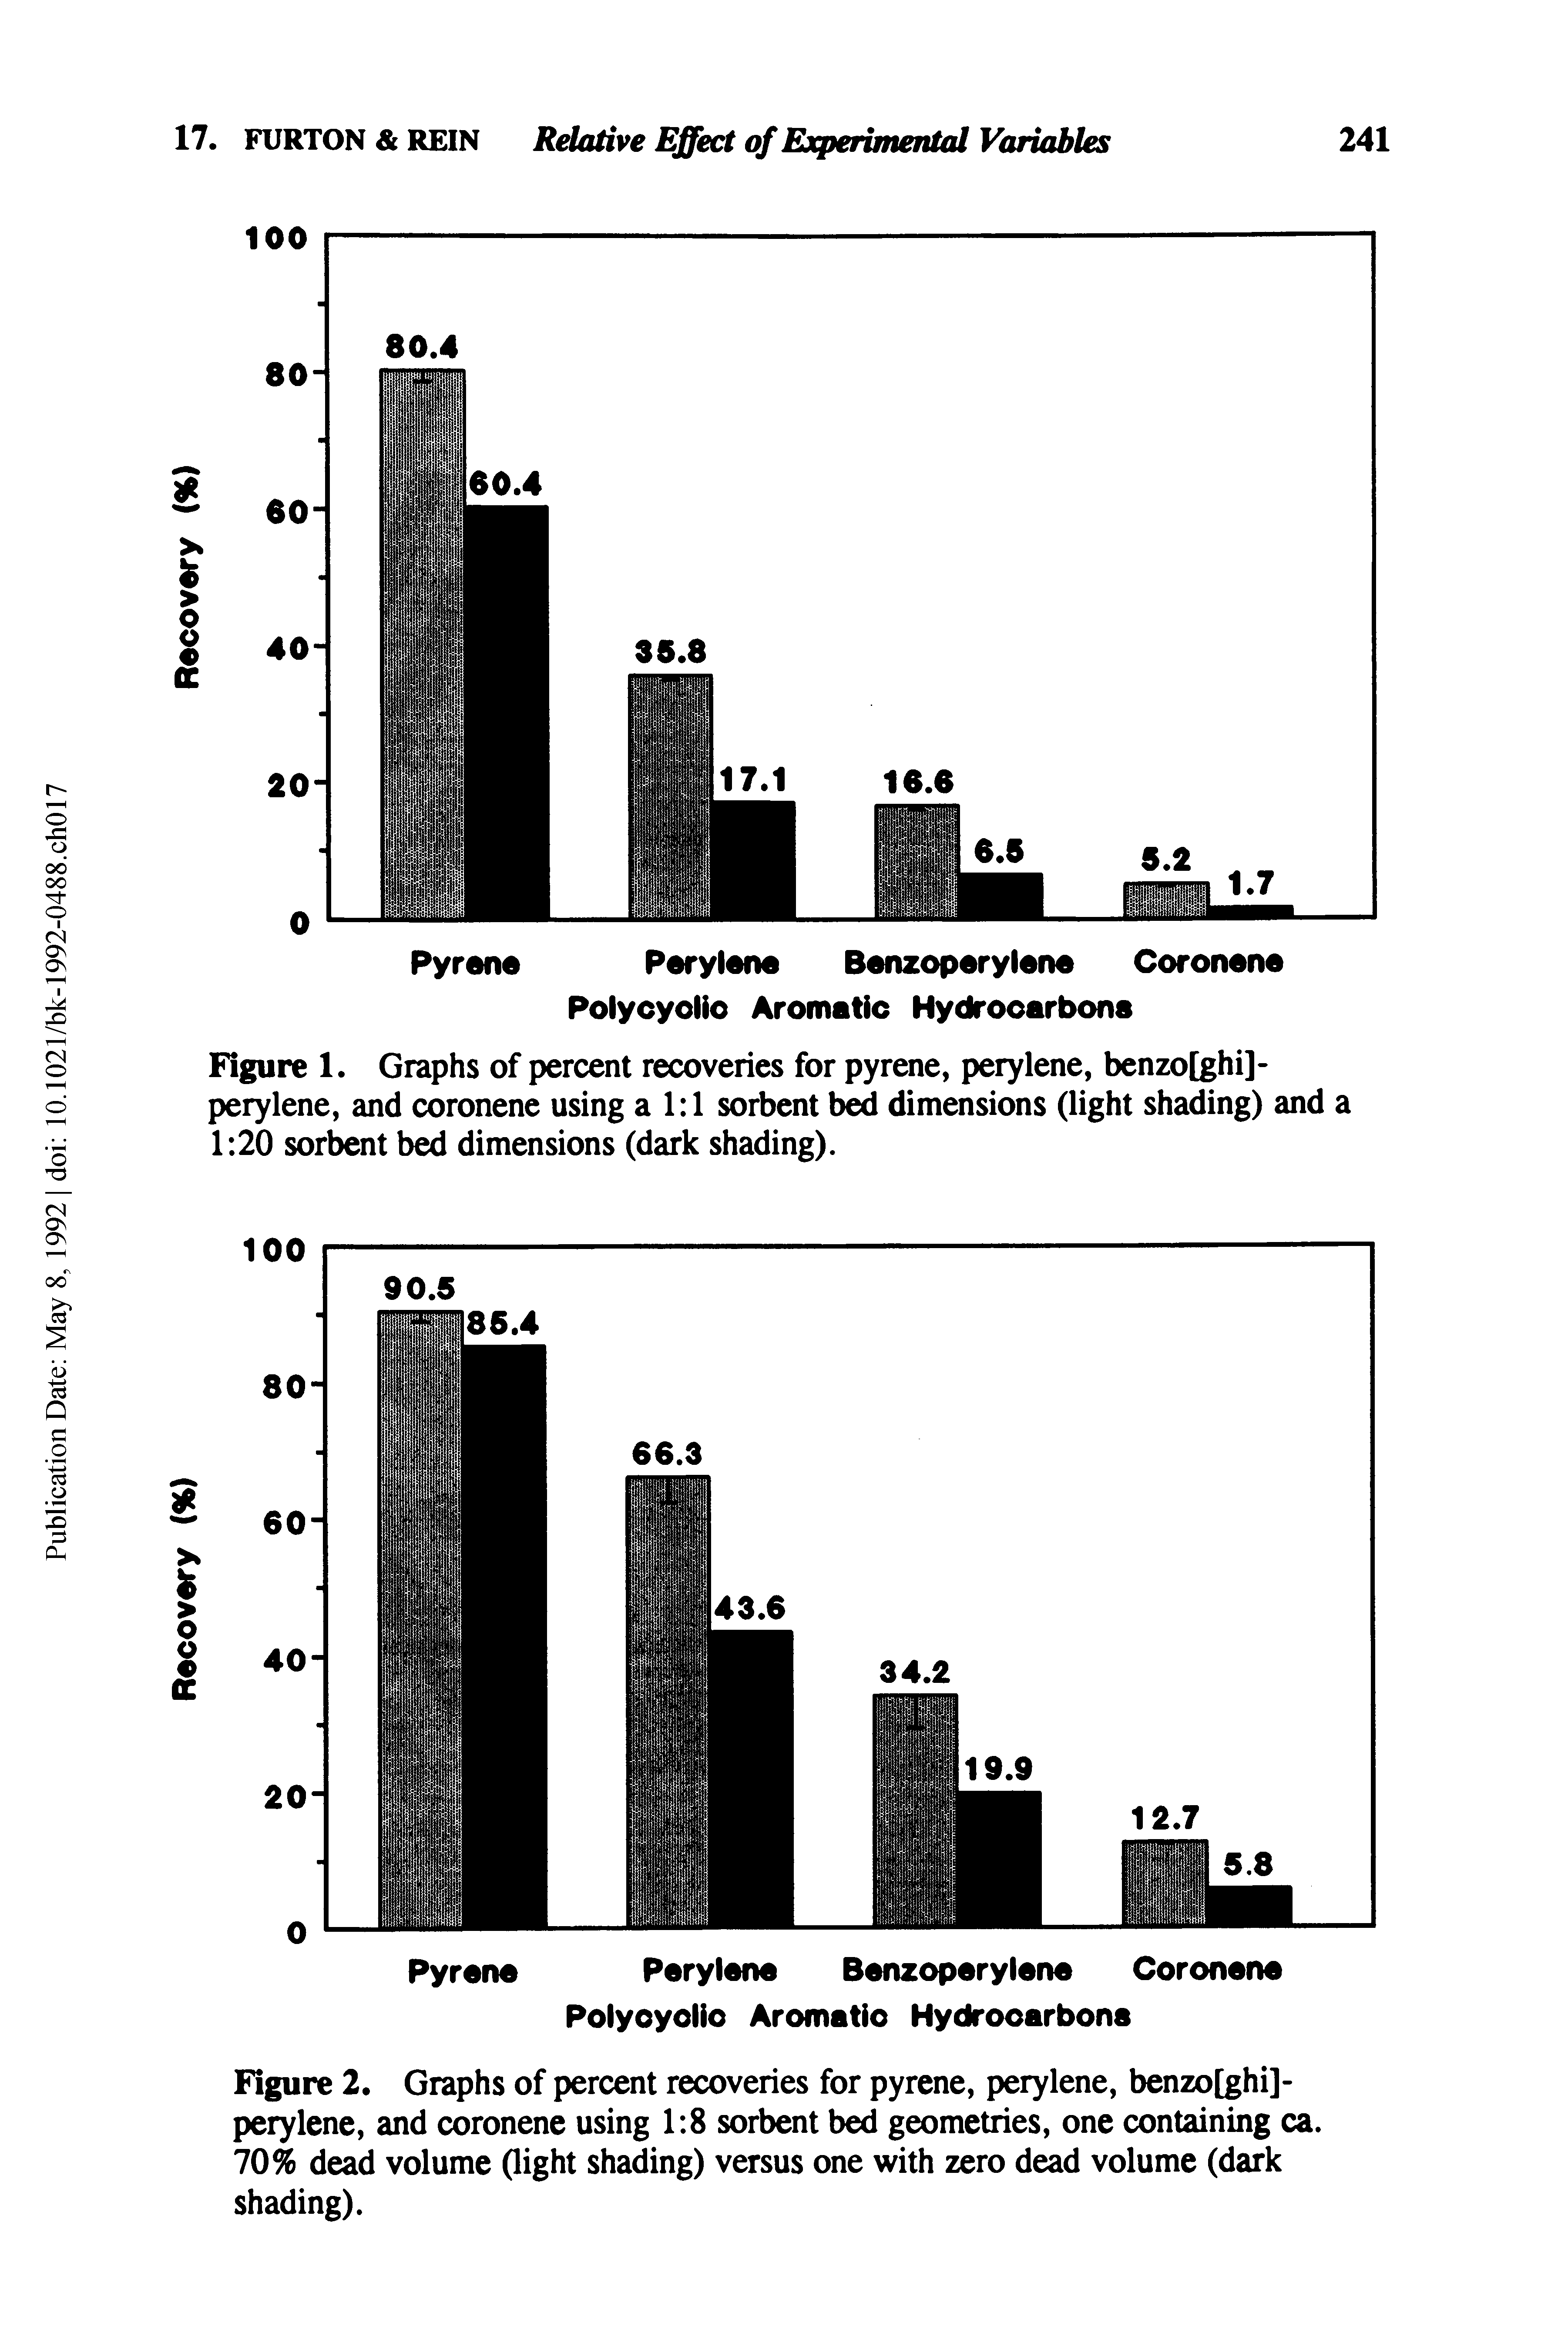 Figure 2. Graphs of percent recoveries for pyrene, perylene, benzo[ghi]-perylene, and coronene using 1 8 sorbent bed geometries, one containing ca. 70% dead volume (light shading) versus one with zero dead volume (dark shading).